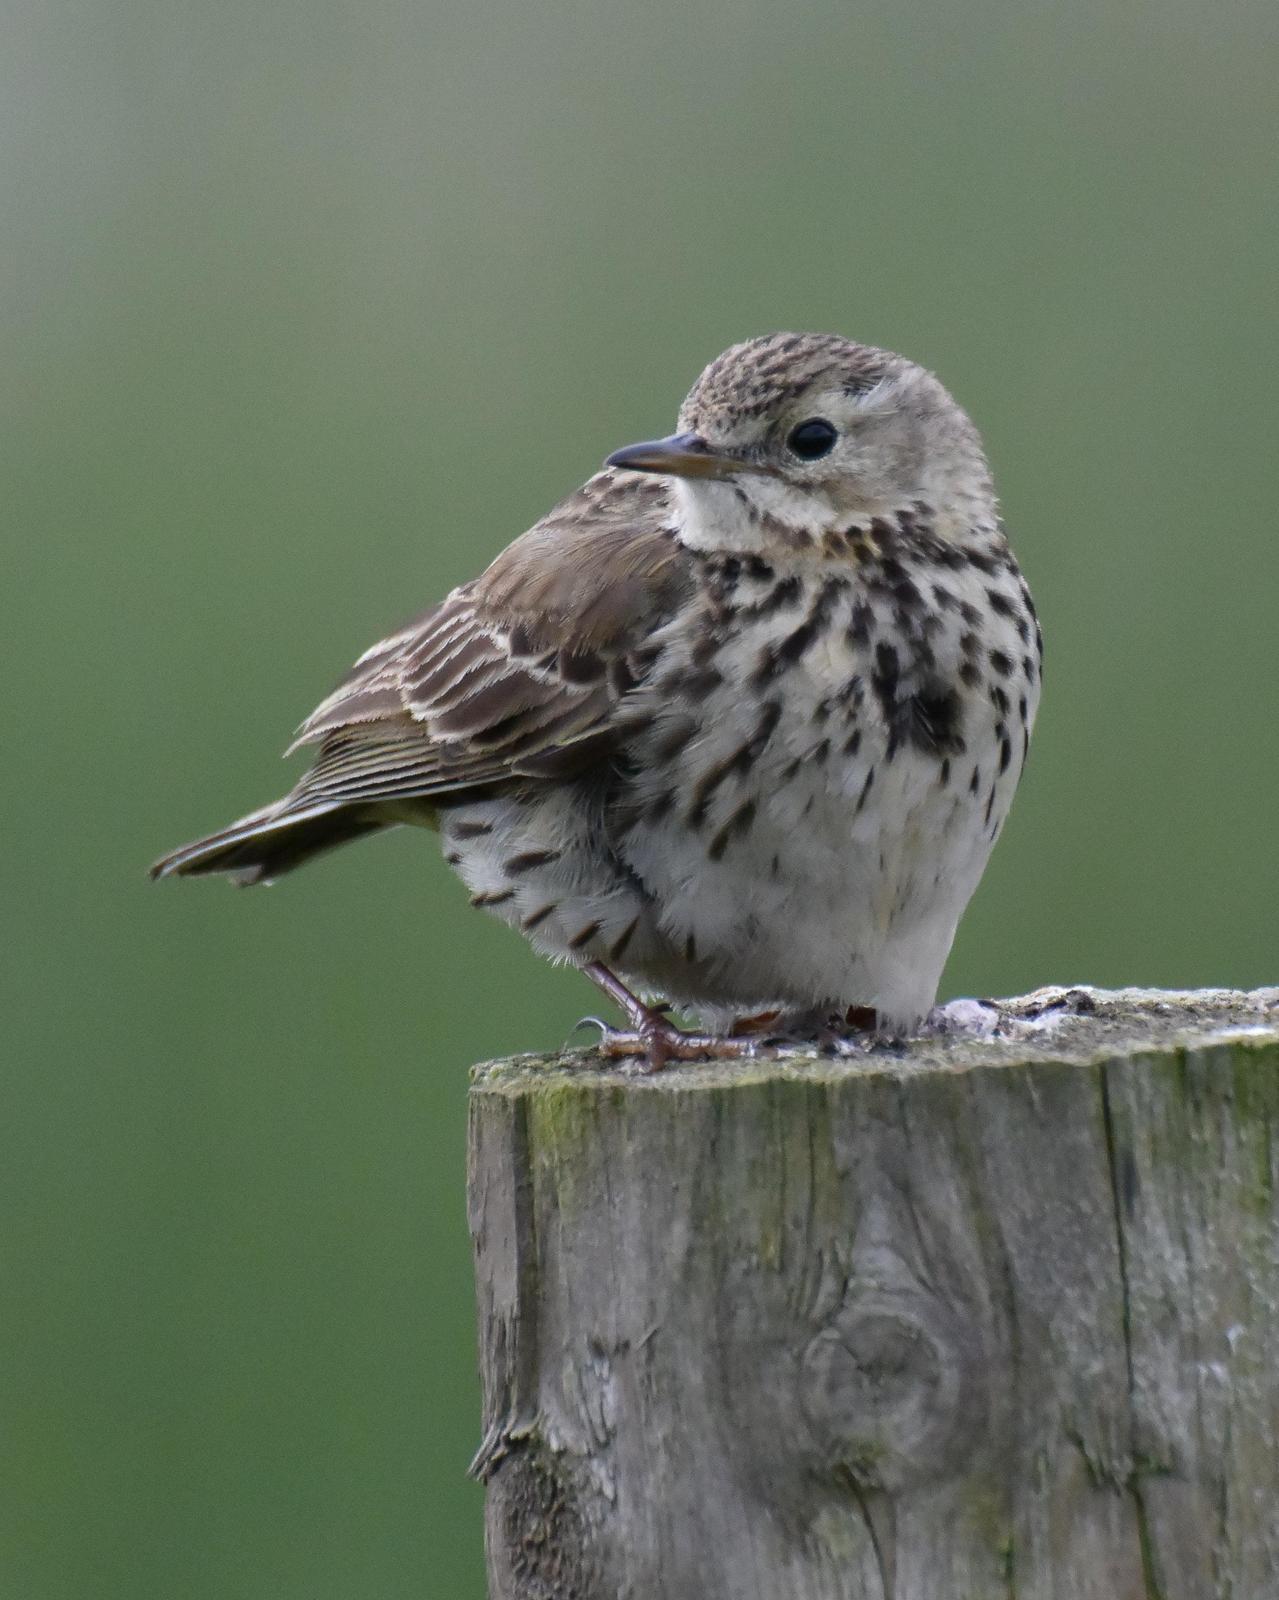 Meadow Pipit Photo by Emily Percival